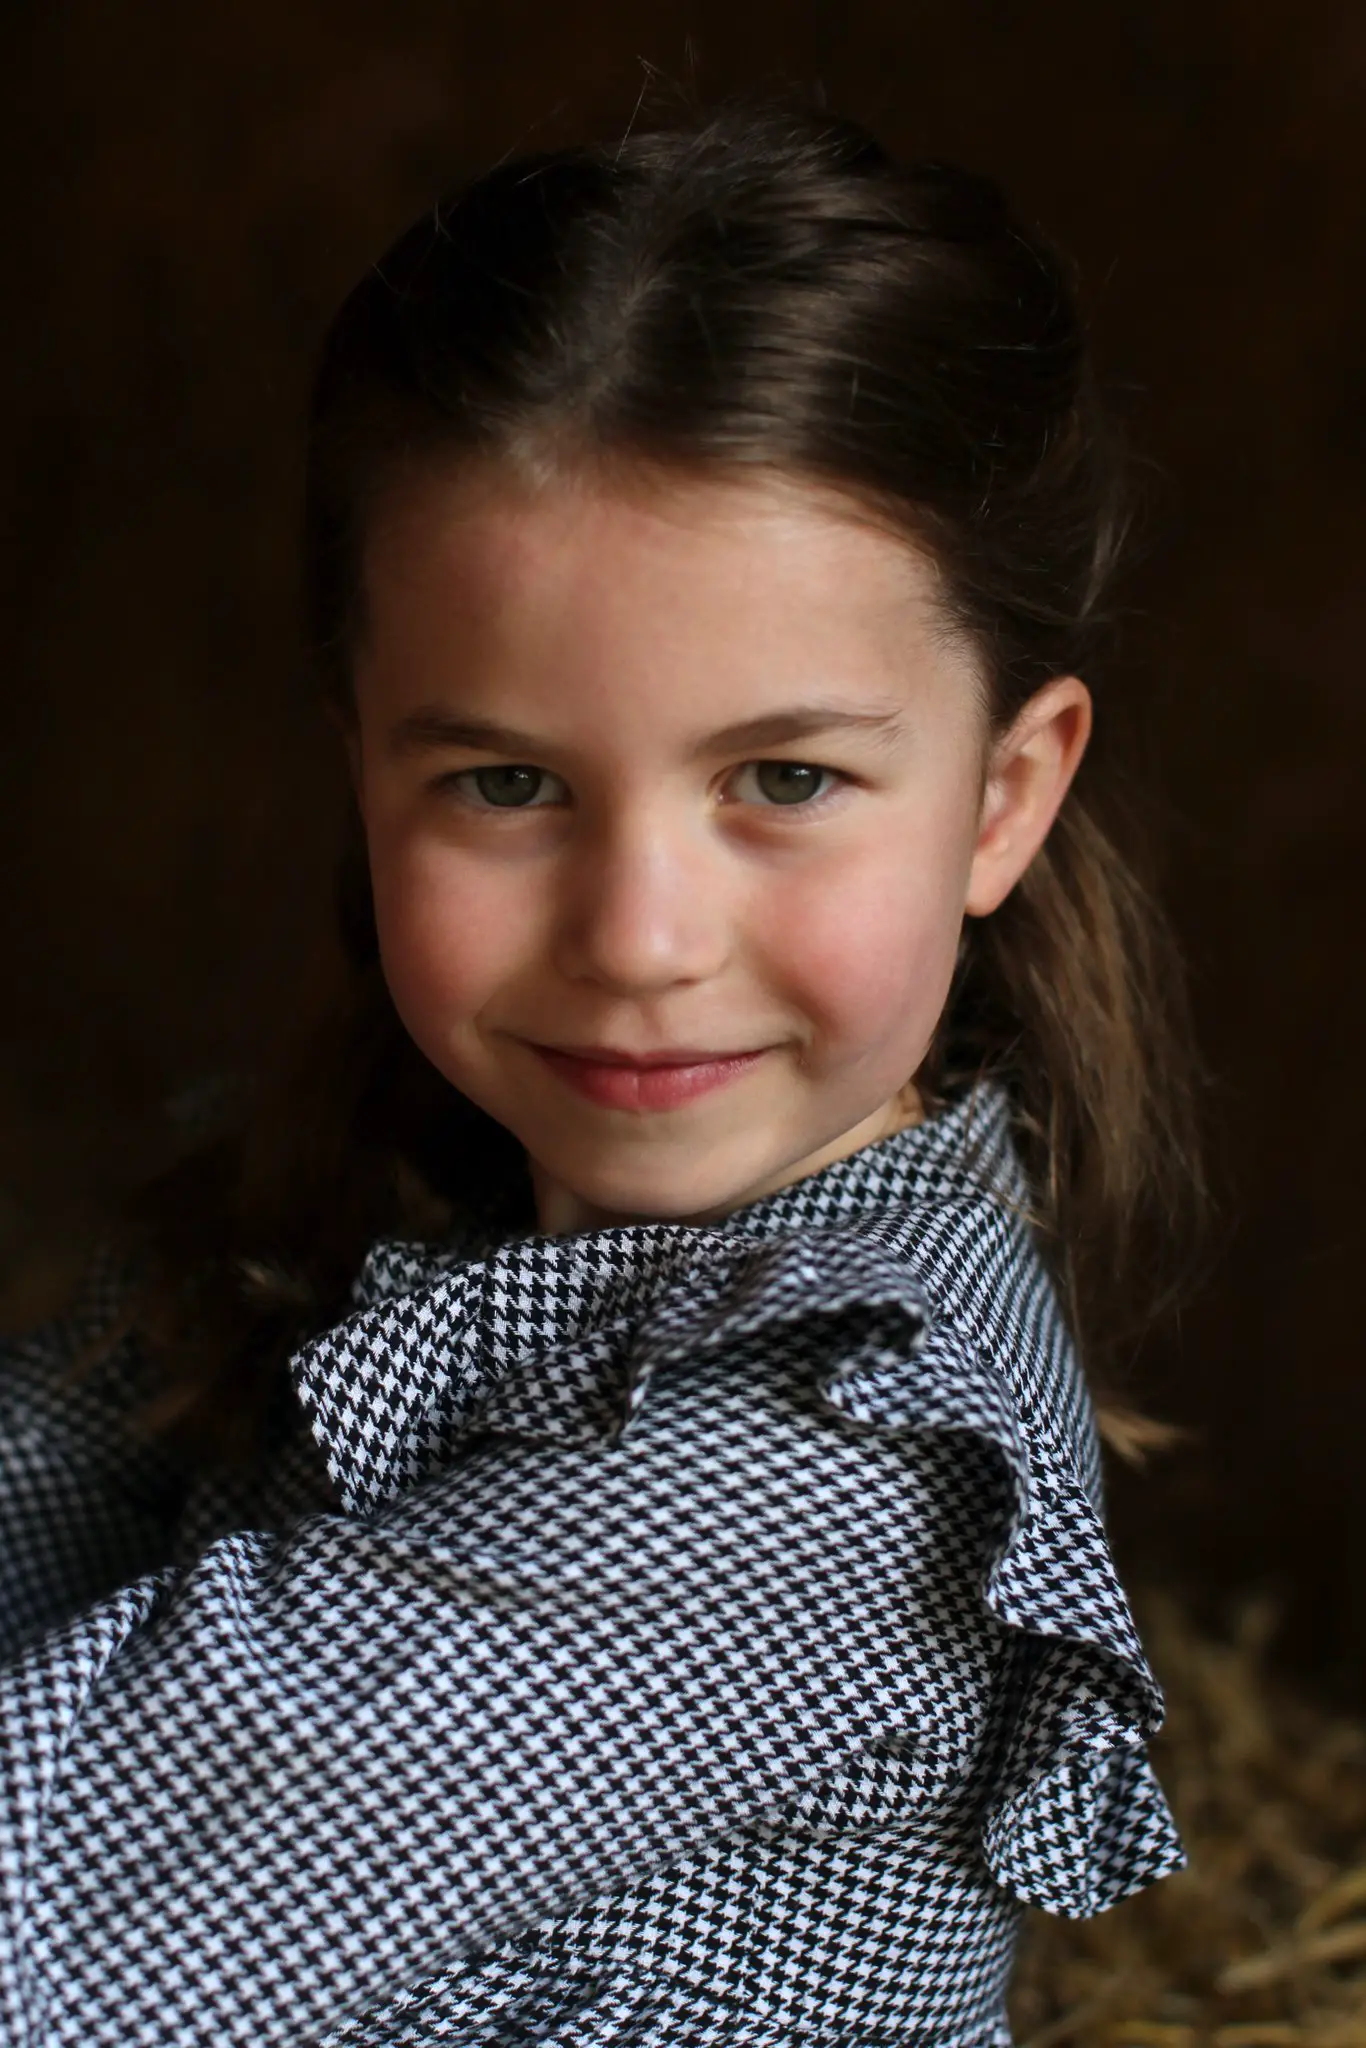 Duke and Duchess of Cambridge relased new pictures of Princess Charlotte to mark her 5th birthday